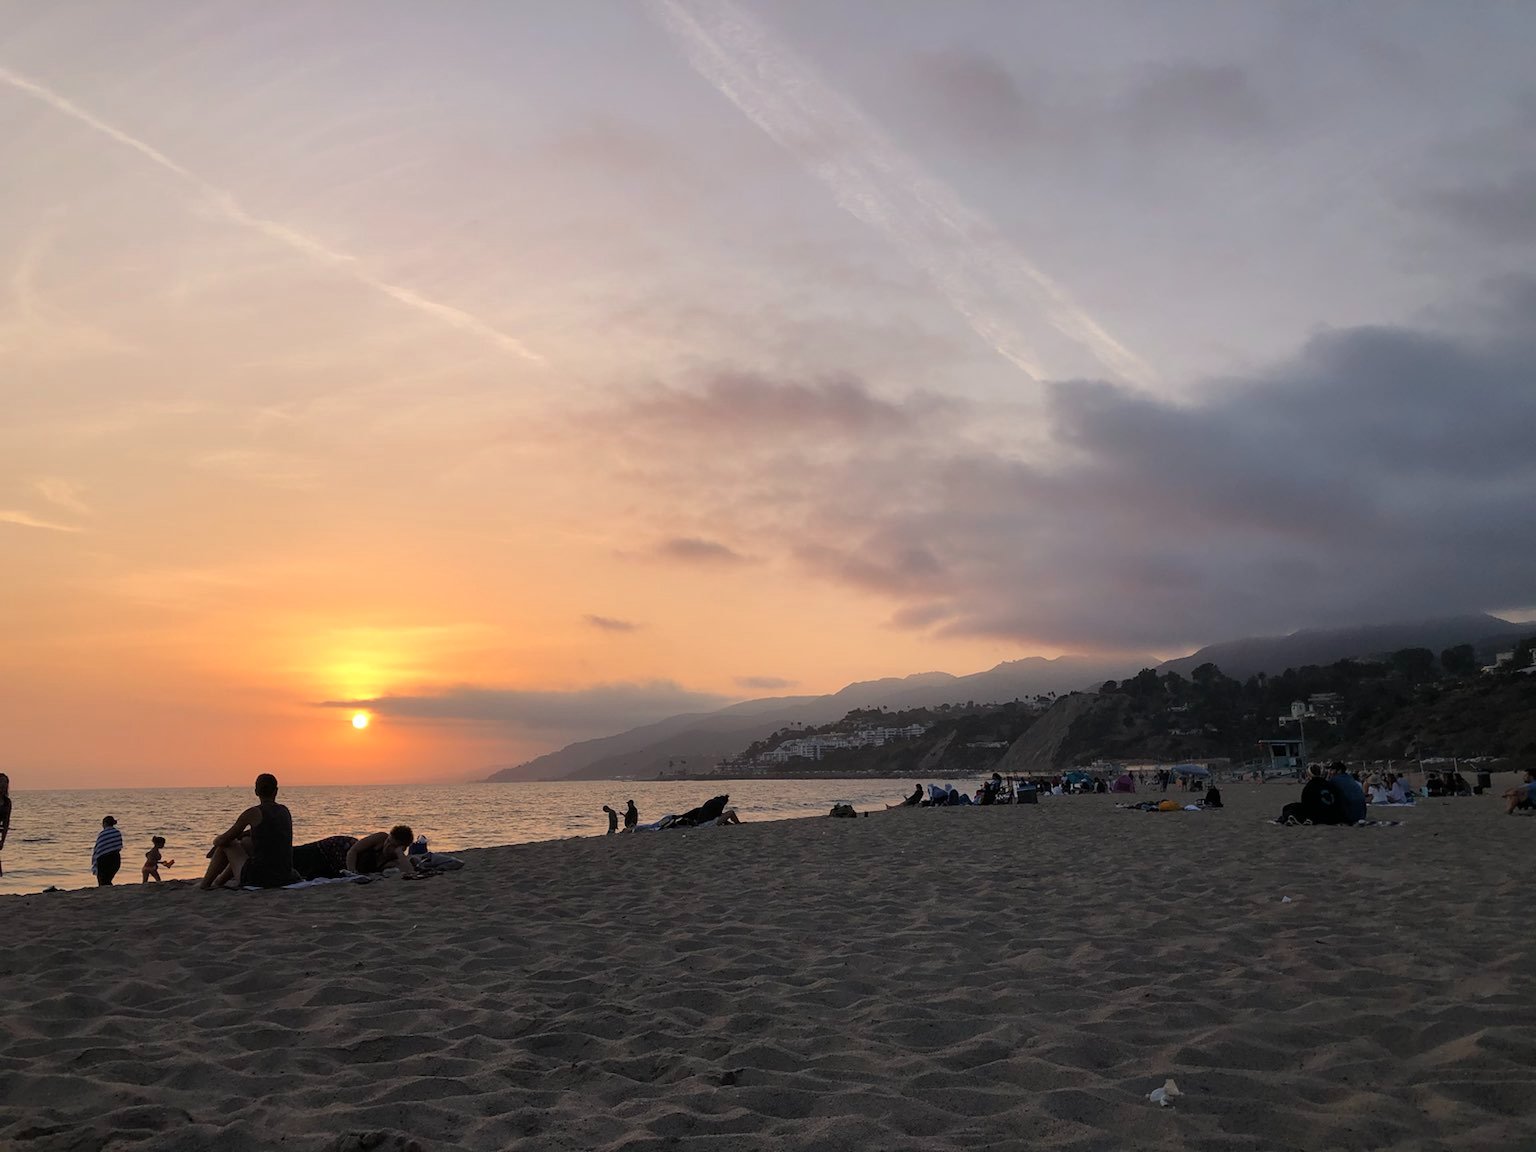 A shot of the sun setting behind smoke from the fires raging up North. This is from when we visited the Leo Carrillo beaches, which are North towards Malibu.